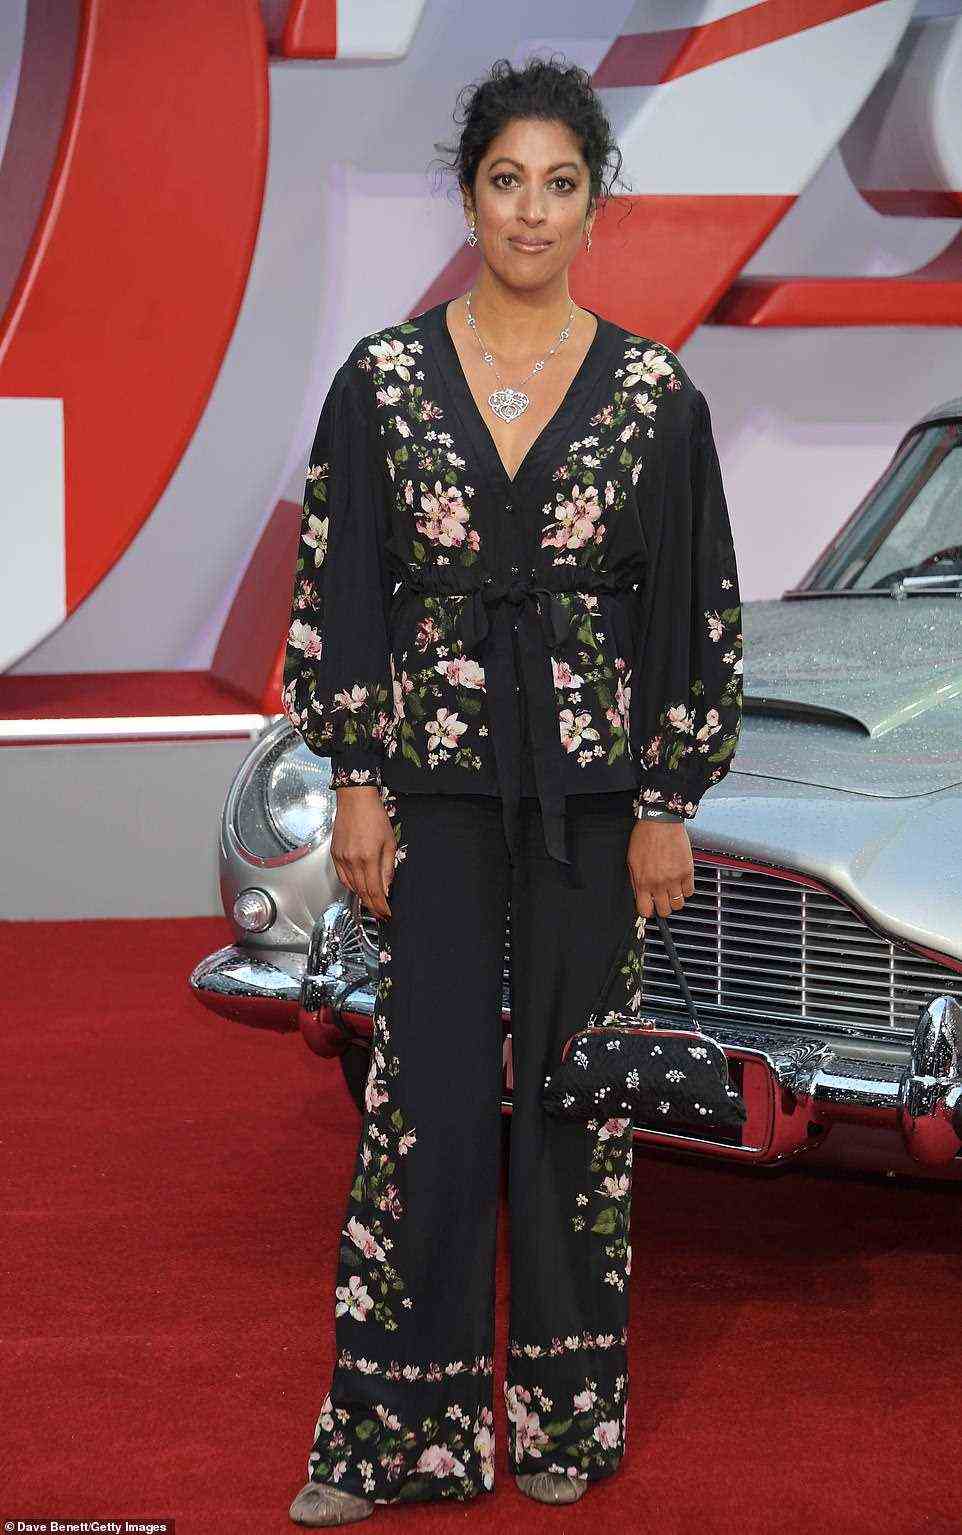 Floral: Actress Priyanga Burford stepped onto the carpet wearing a striking floral wraparound top and matching trousers